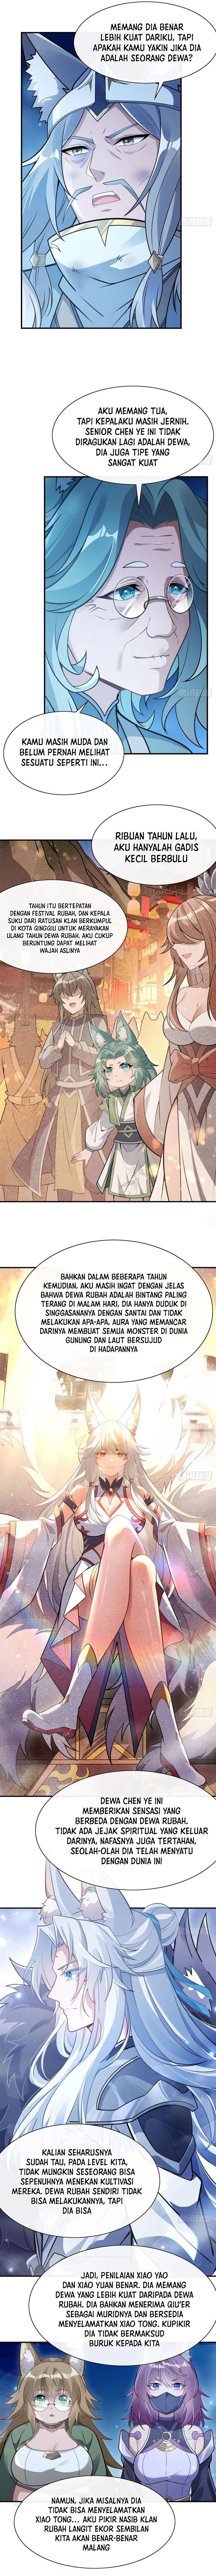 Dilarang COPAS - situs resmi www.mangacanblog.com - Komik my female apprentices are all big shots from the future 178 - chapter 178 179 Indonesia my female apprentices are all big shots from the future 178 - chapter 178 Terbaru 2|Baca Manga Komik Indonesia|Mangacan